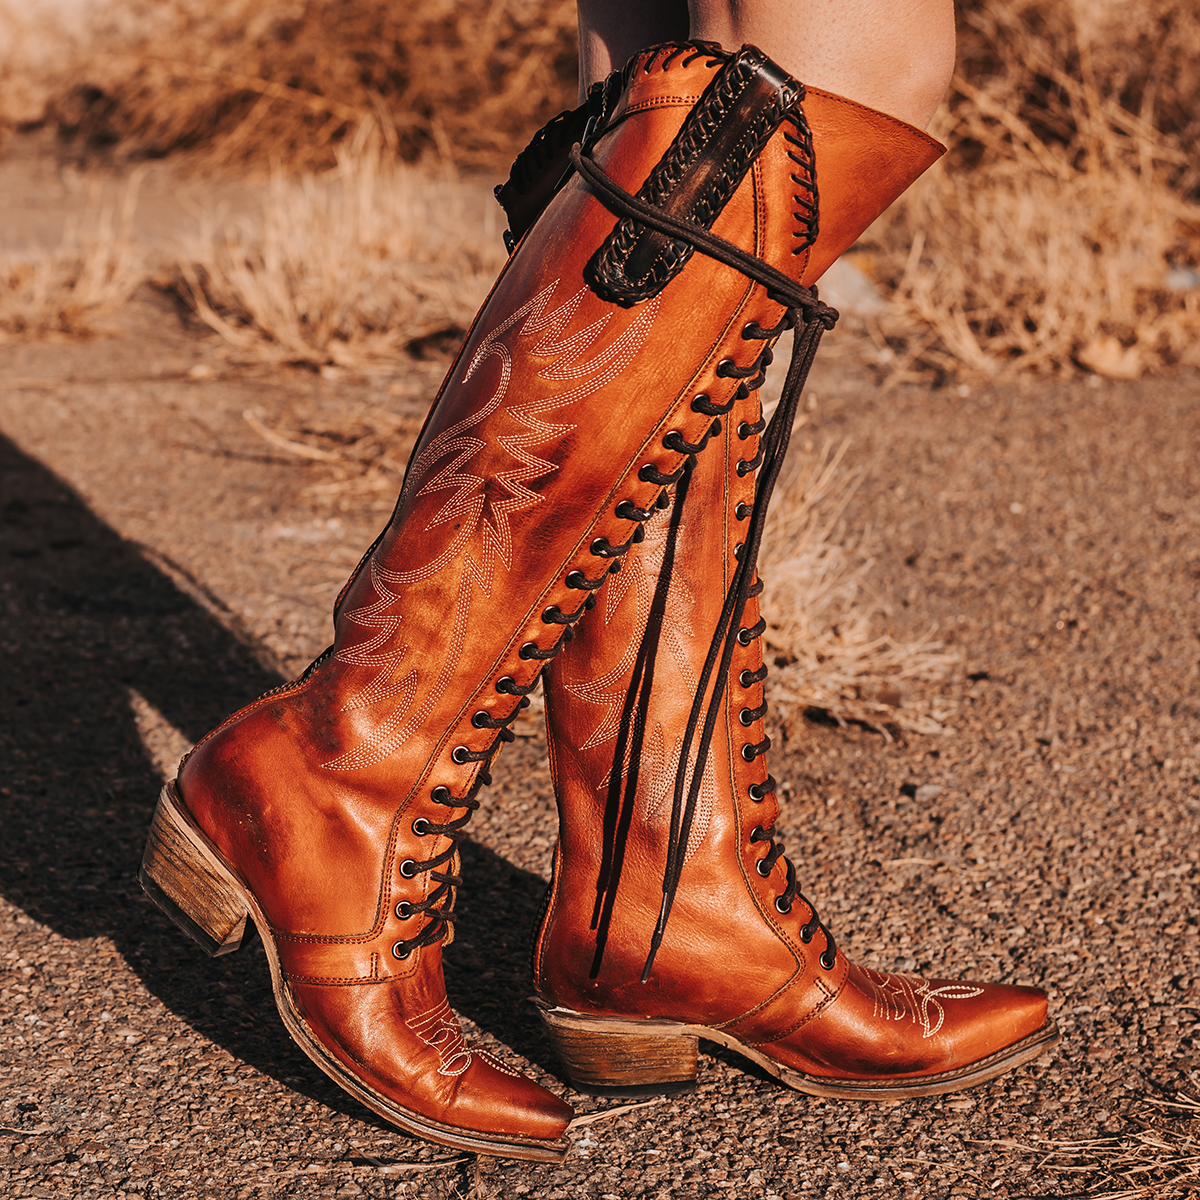 FREEBIRD women's Wilder whiskey boot featuring a tall lace up shaft, contrasting stitch detailing, woven leather accents, and a back brass zip closure